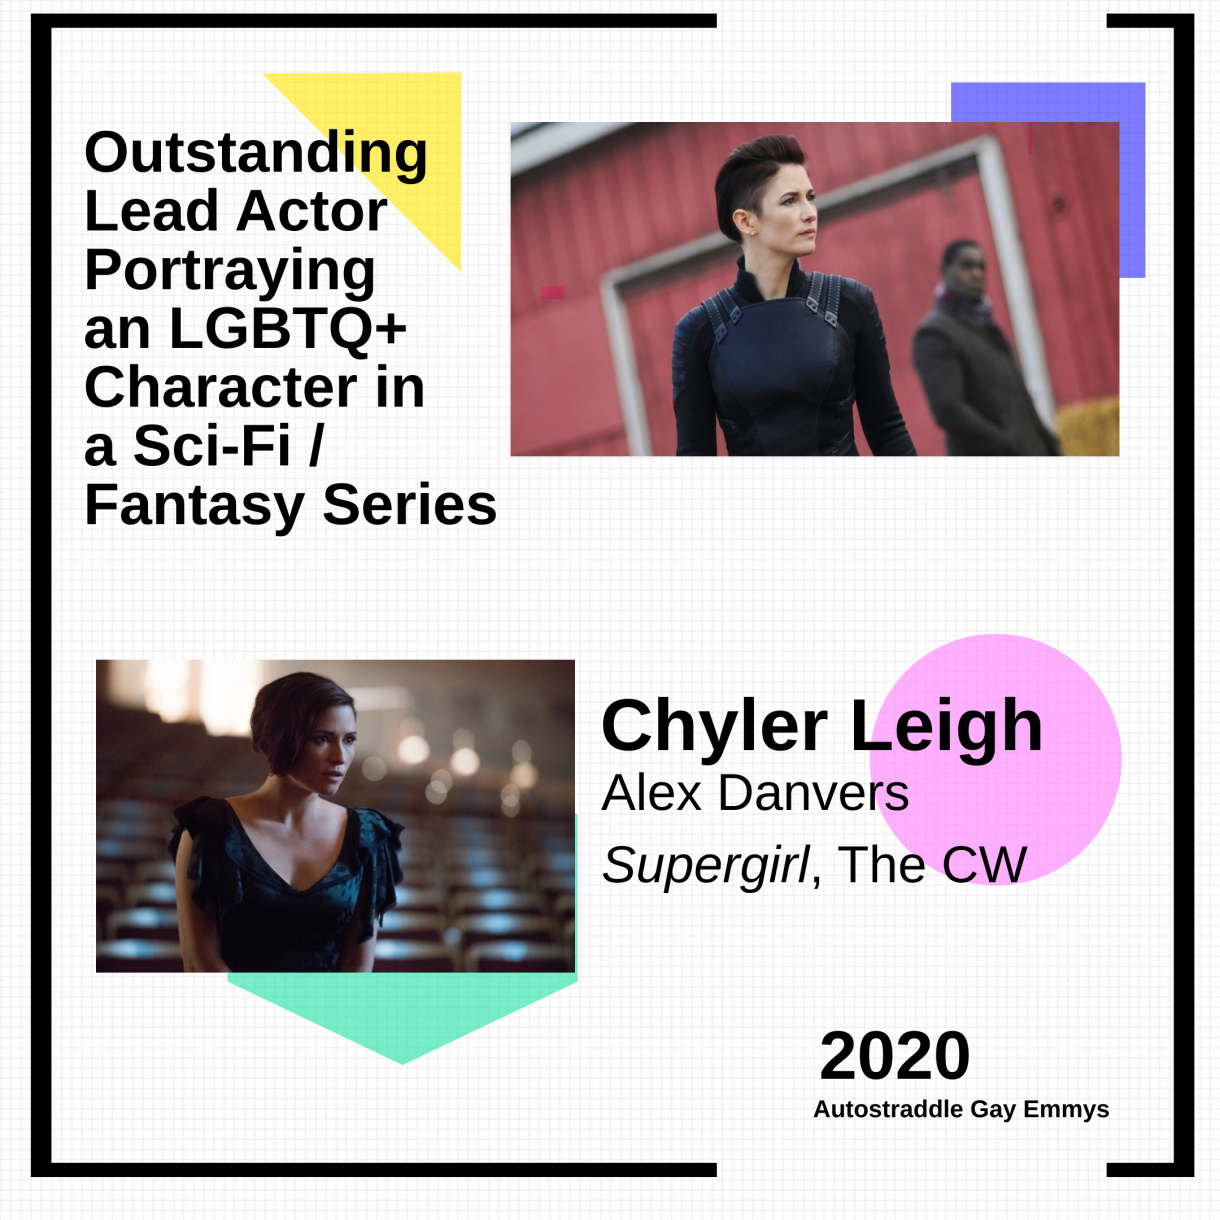 Outstanding Lead Actor Playing an LGBTQ+ Character in a Sci-Fi/Fantasy Series: Chyler Leigh as Alex Danvers, Supergirl. Two pictures of Alex Danvers with short hair looking badass.